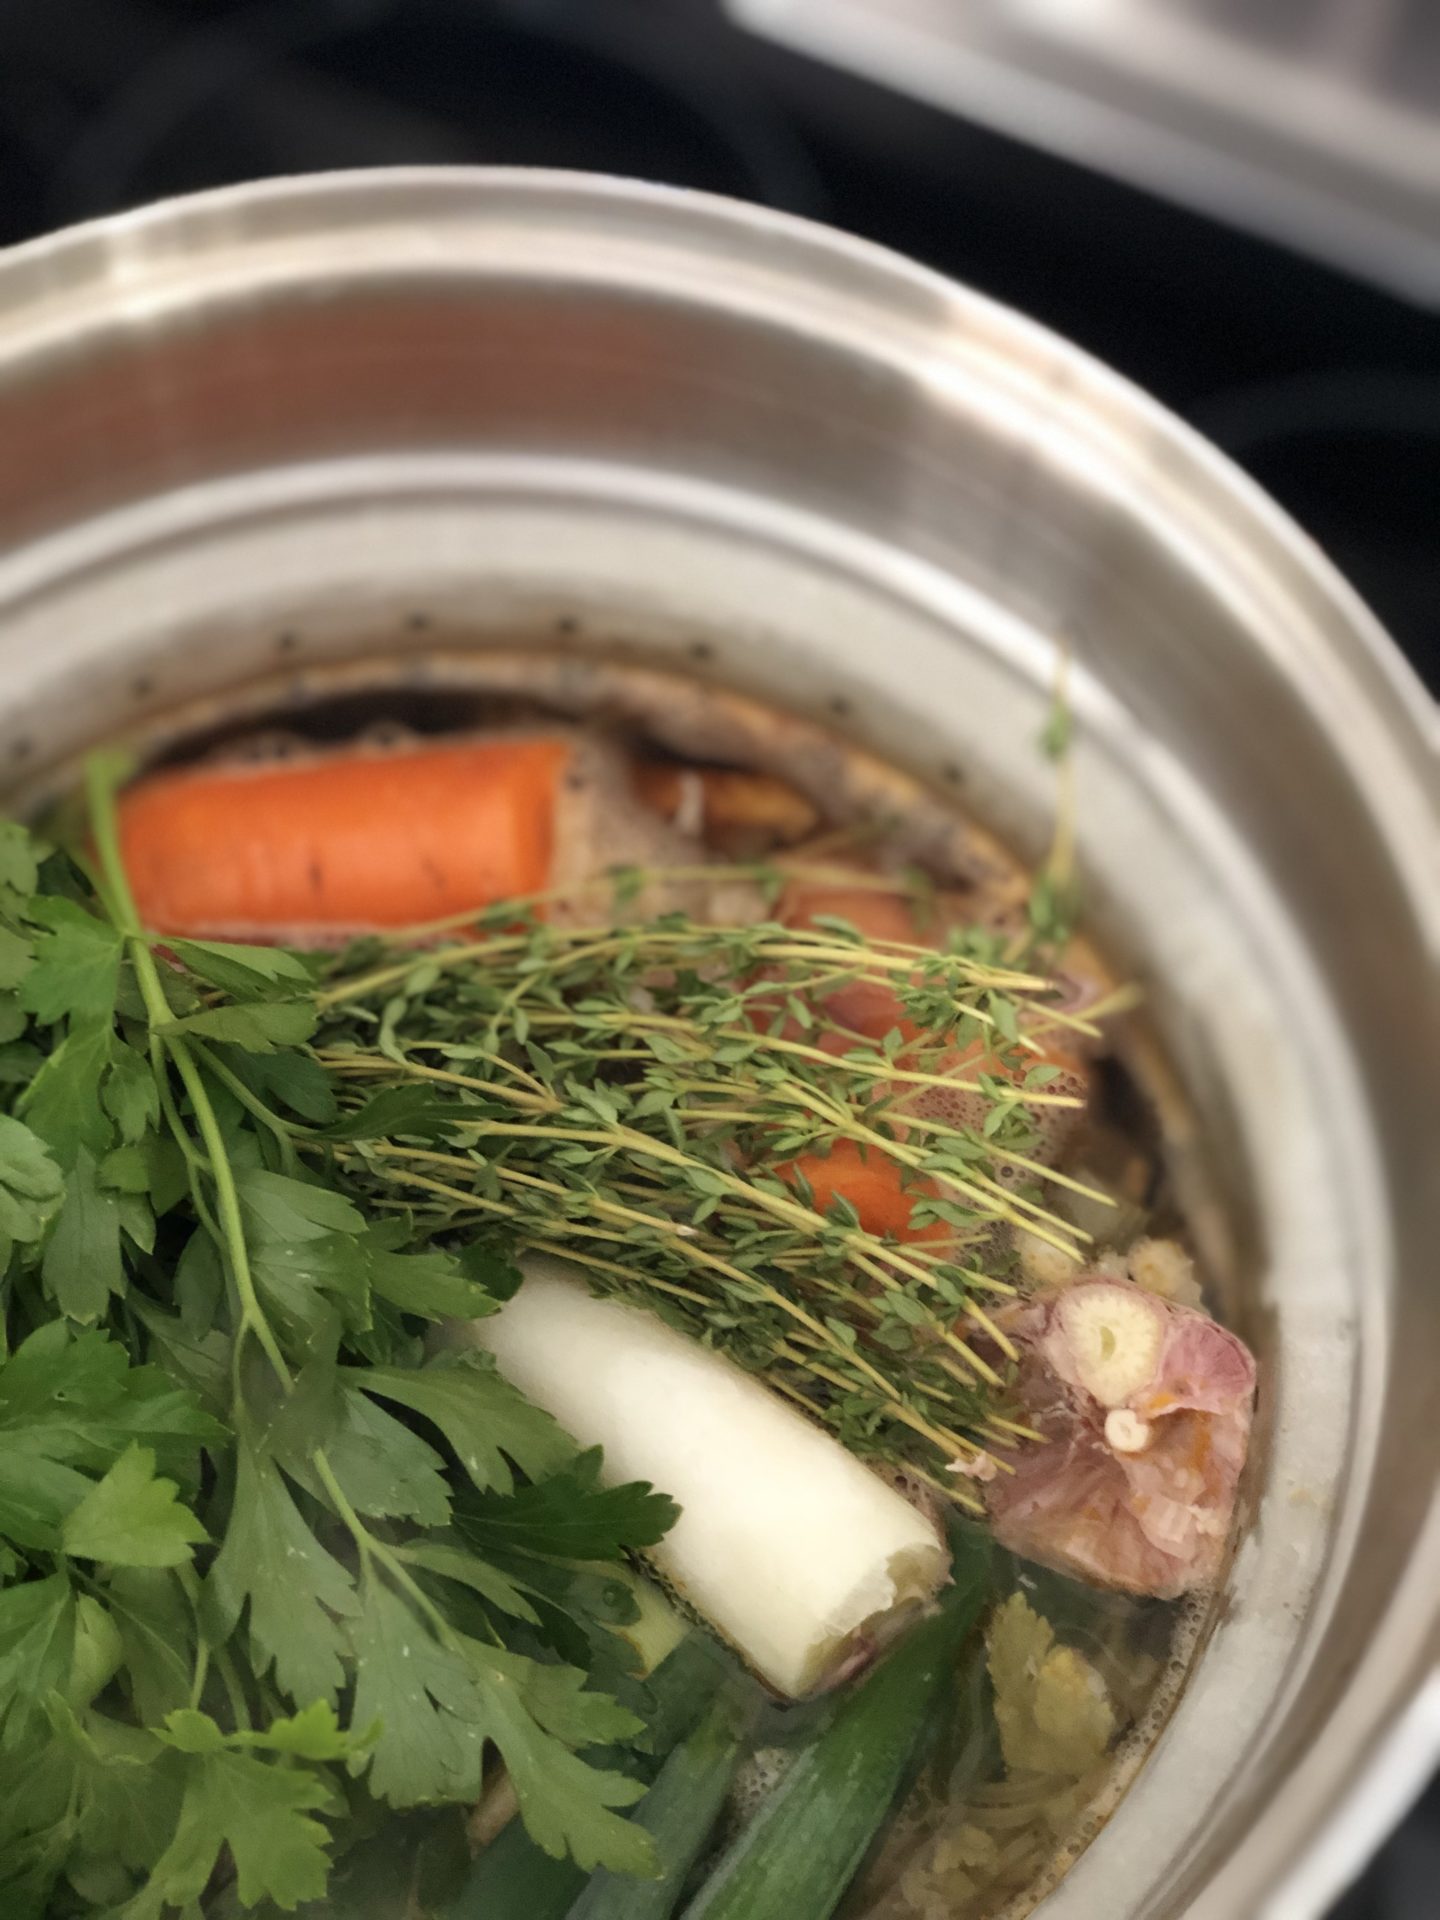 Fresh vegetables, herbs and chicken bones simmer away in a large stainless steel pot